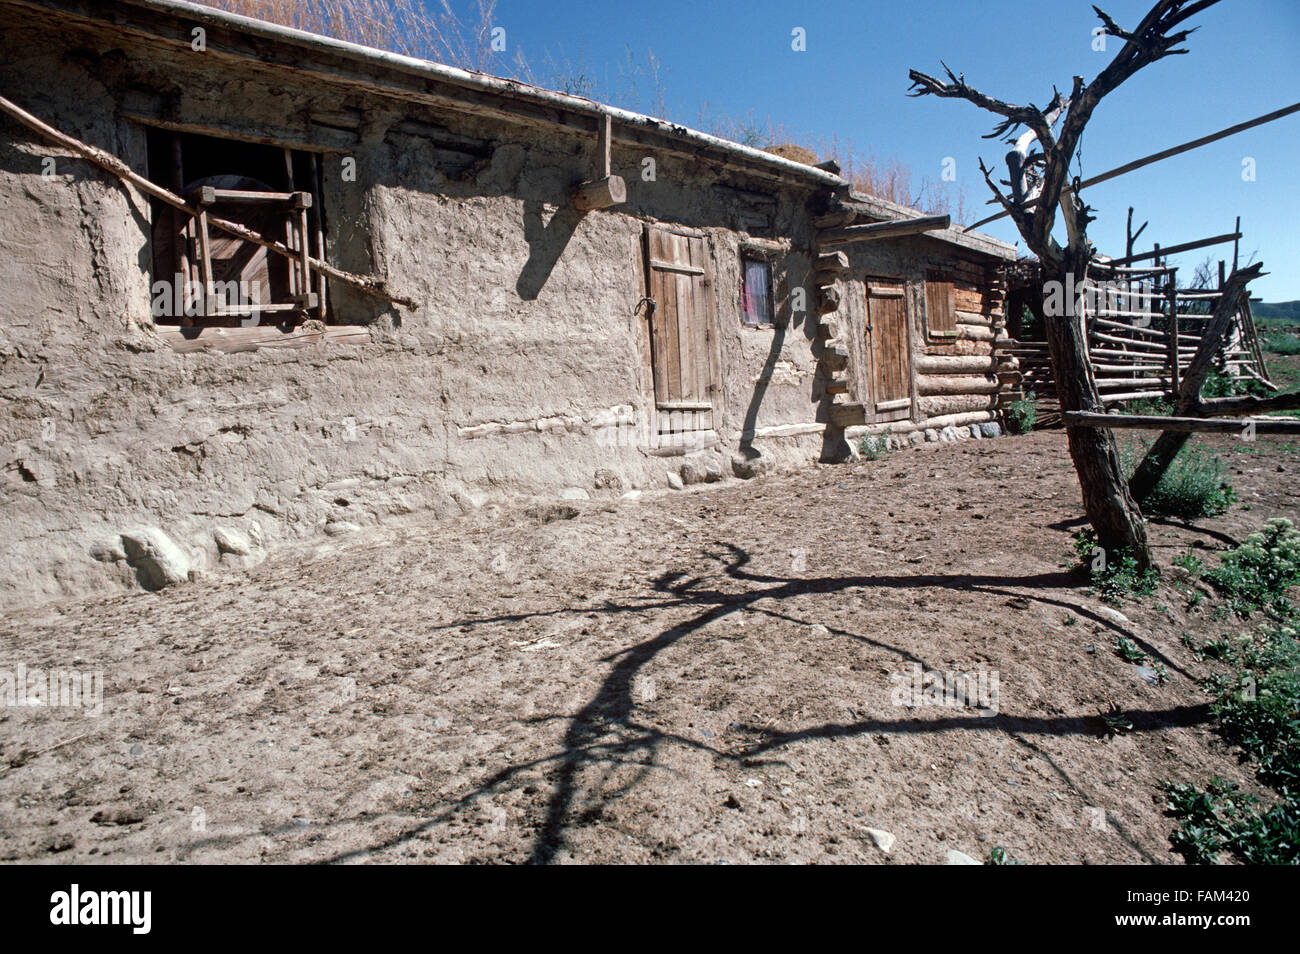 Kazakh farmhouse built out wood and mud in hills North of Urumqi, Xinjiang Province, China Stock Photo